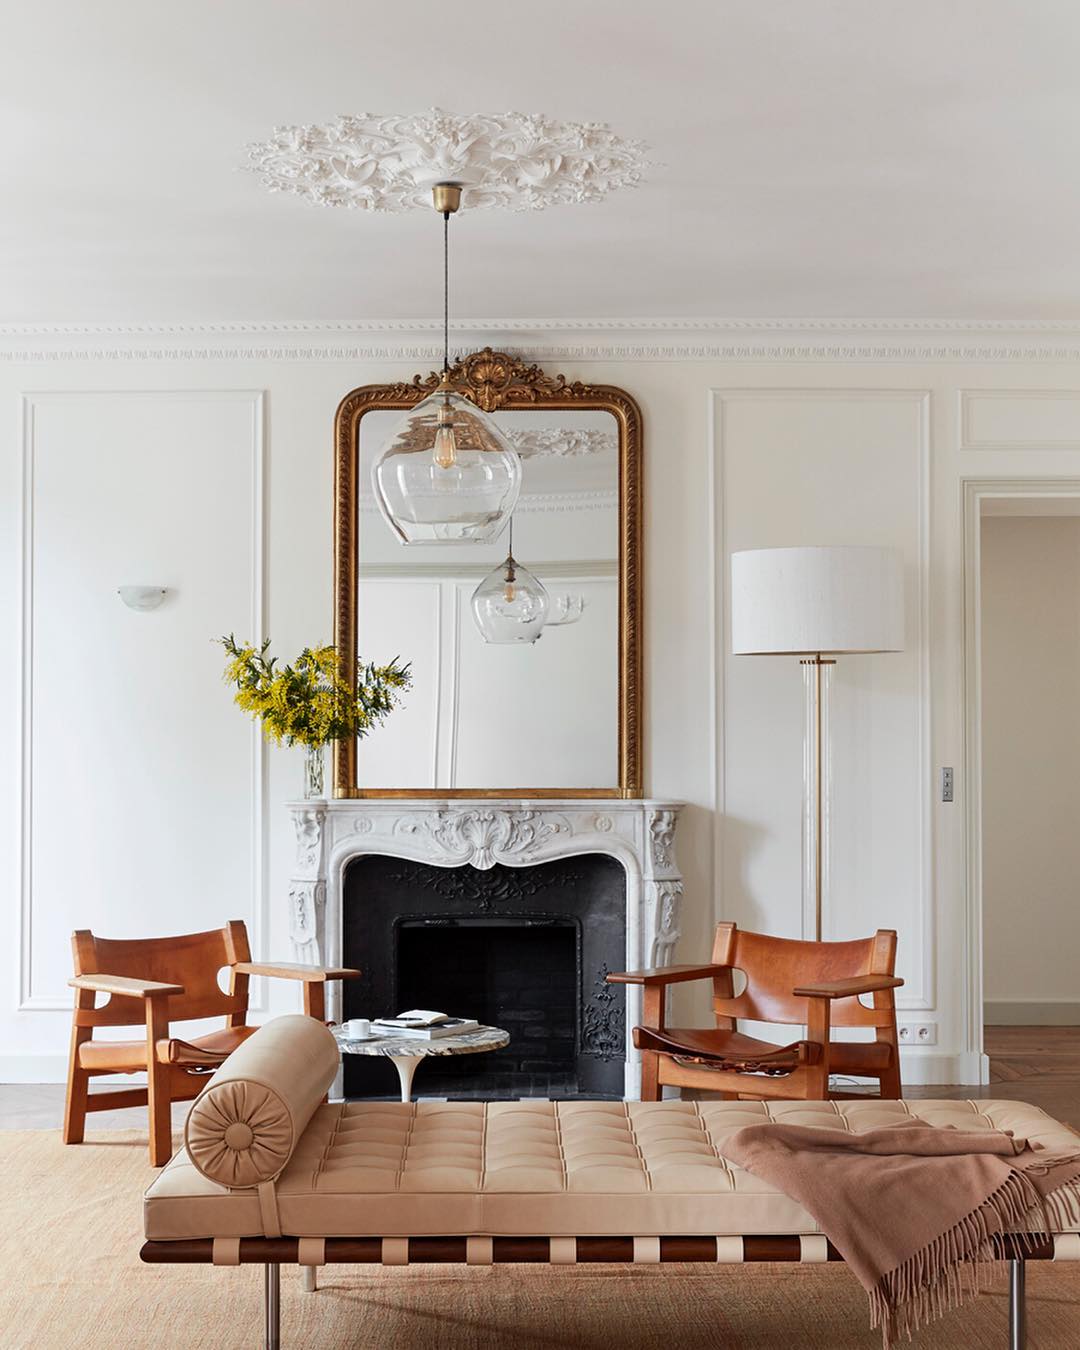 Parisian mirror in Paris apartment with fireplace and beige leather chairs via abkasha